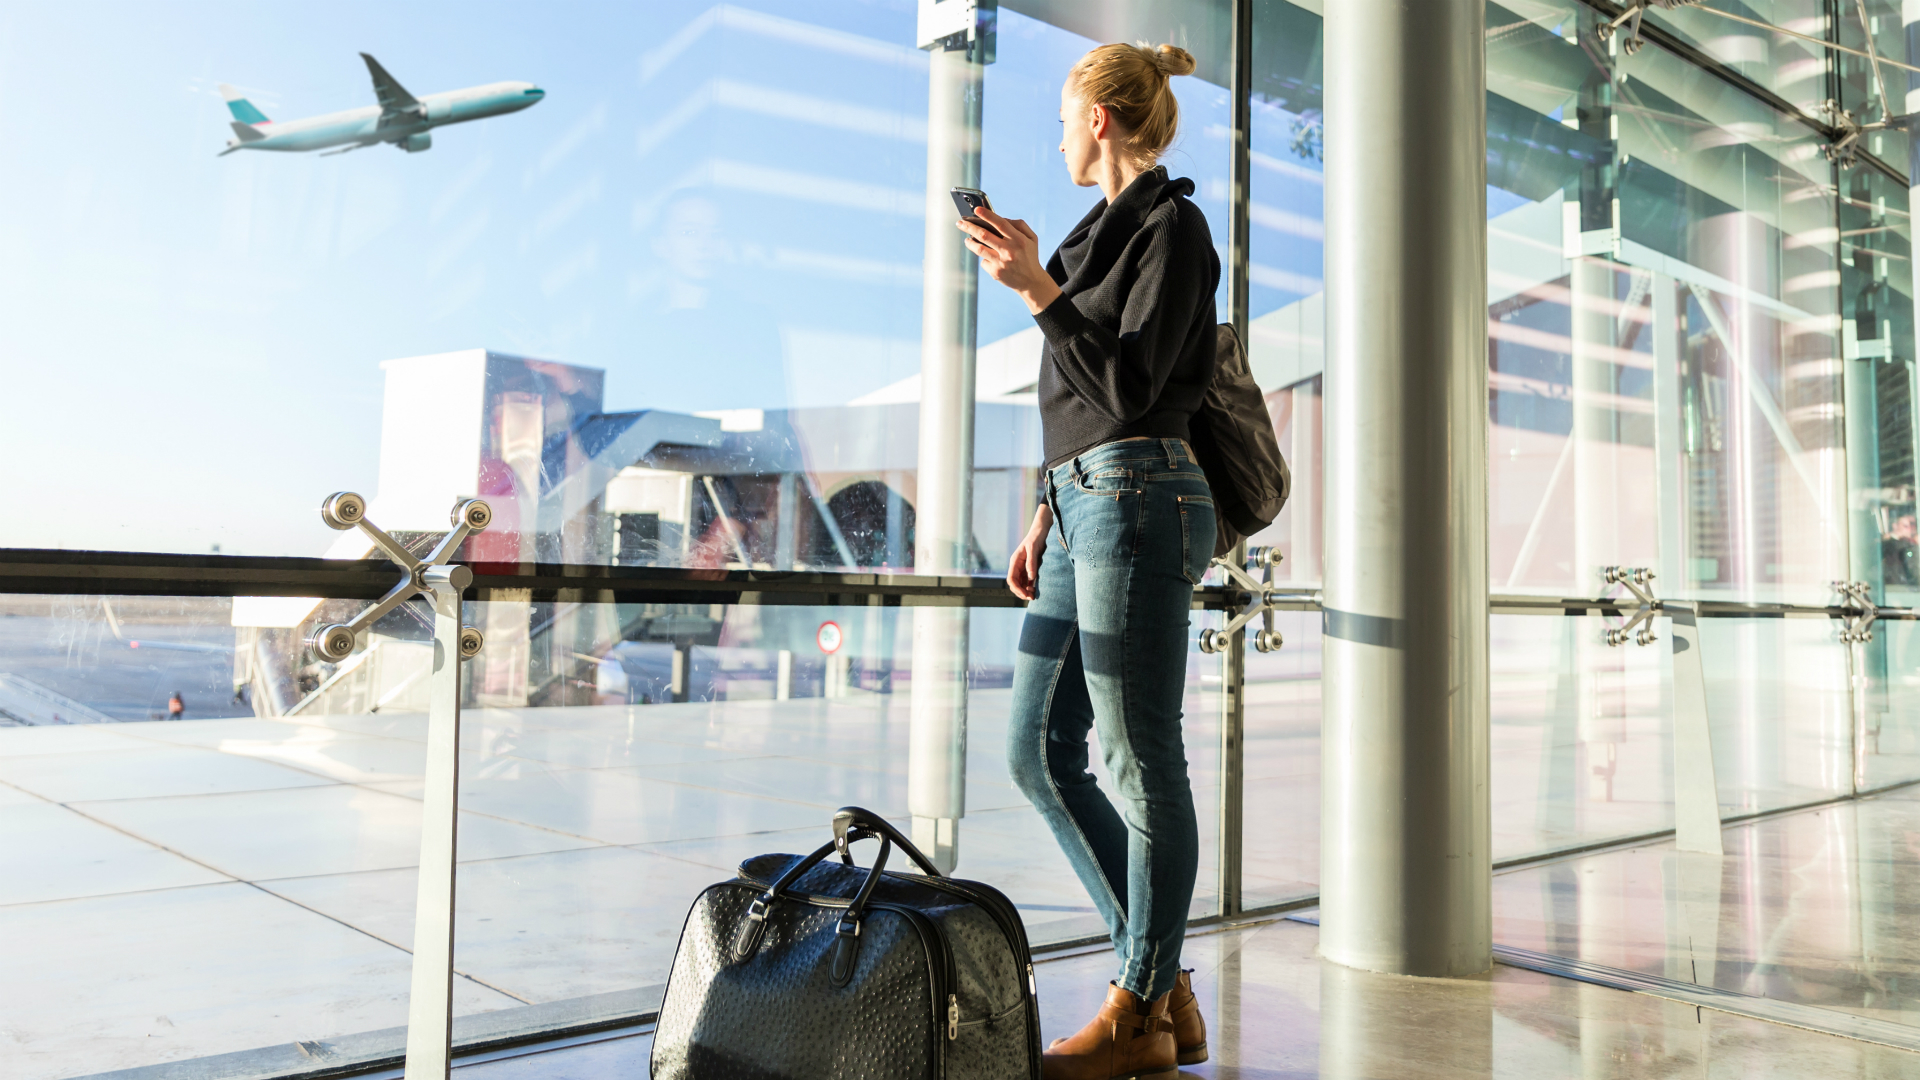 woman looking longingly out of airport window at a plan taking off into a clear blue sky